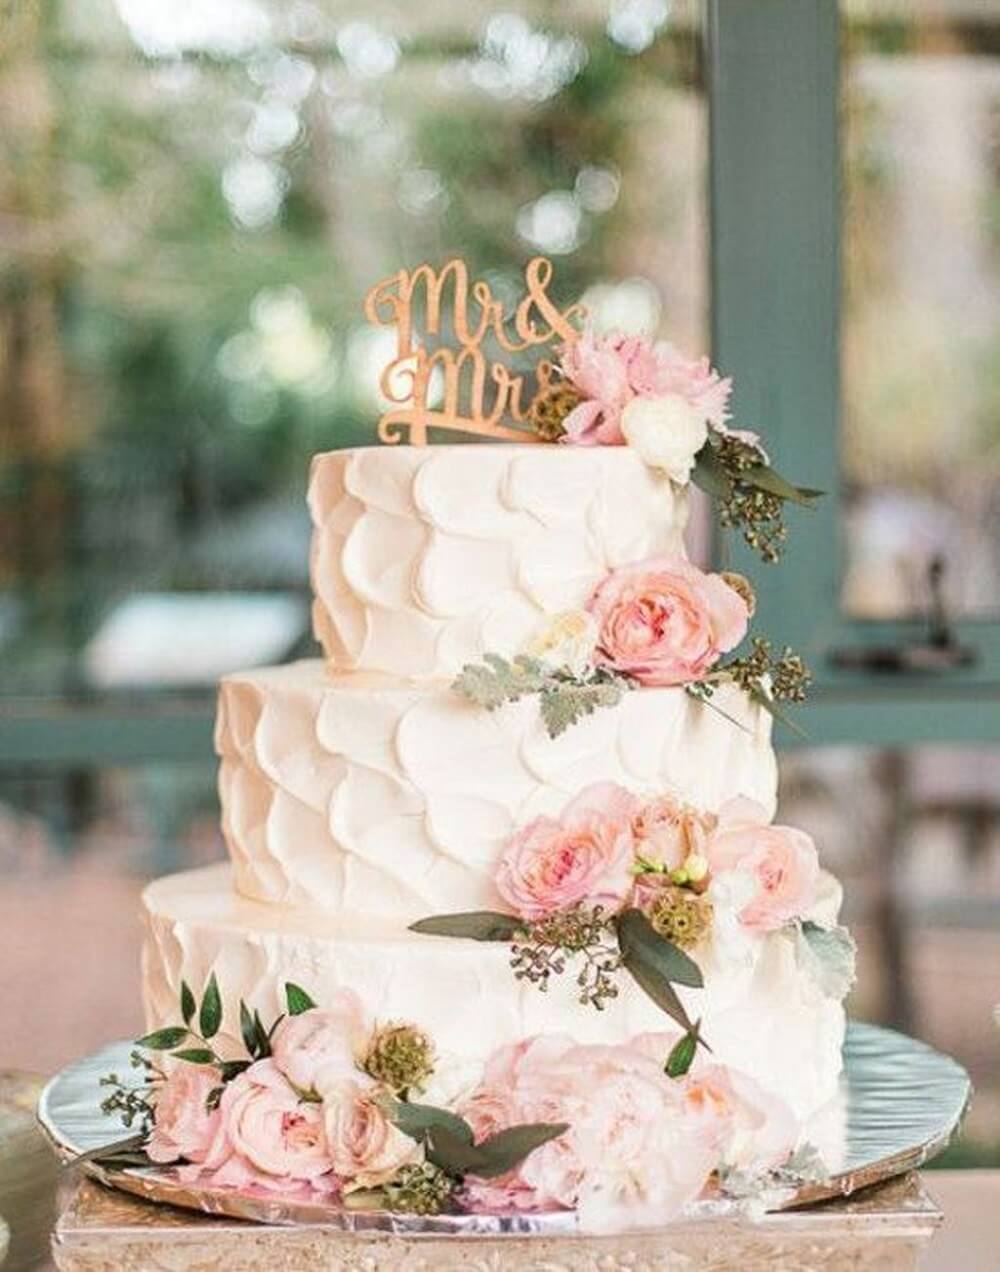 Top 5 Amazing Wedding Cake Trends for the Upcoming Season